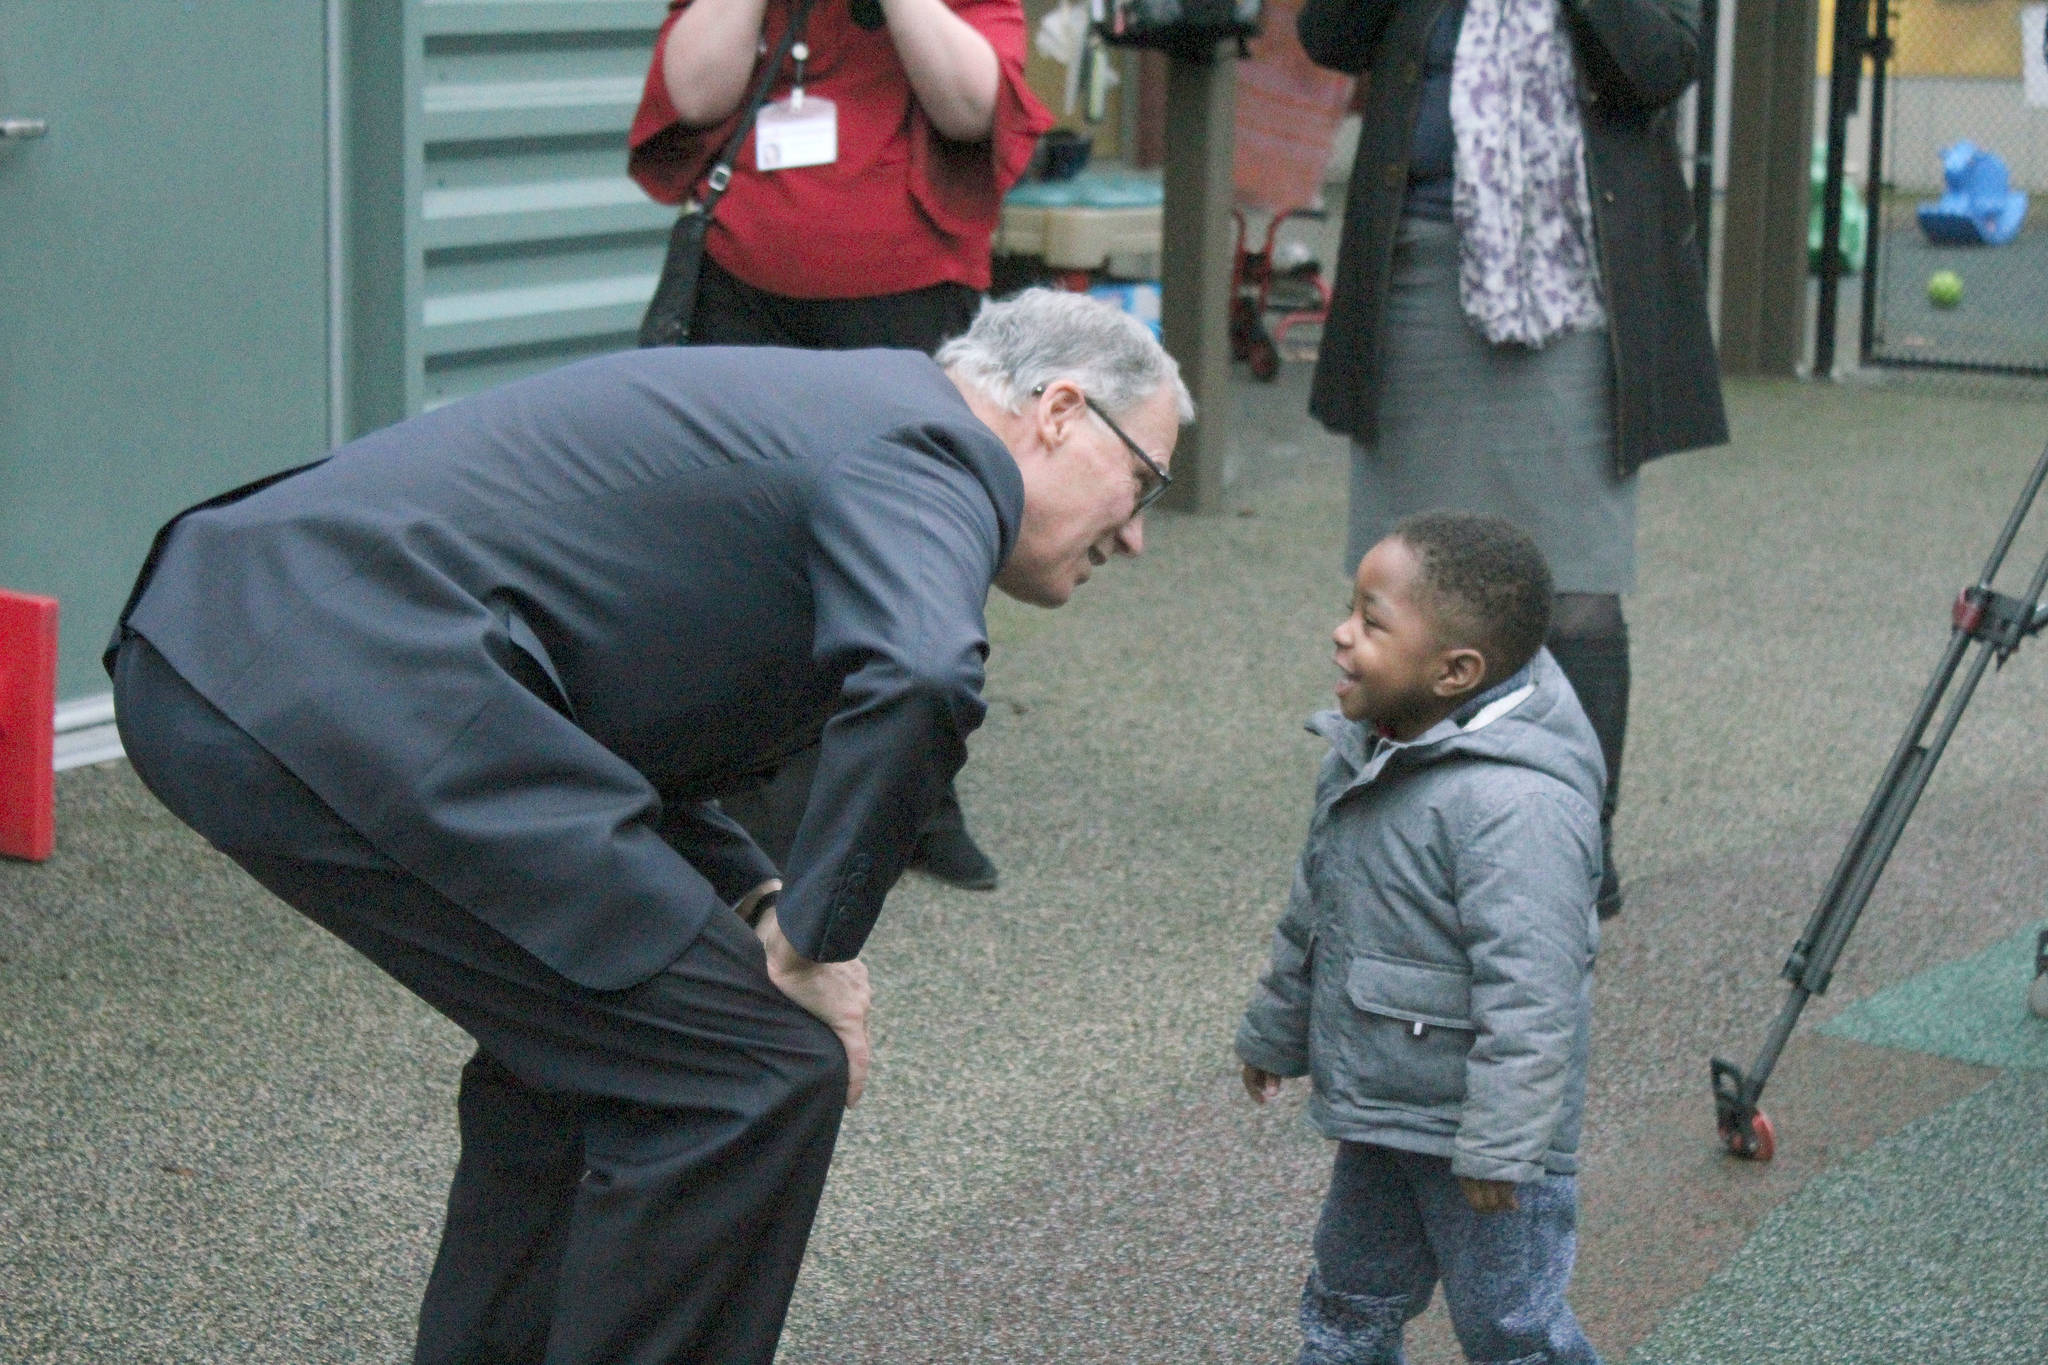 In this January 2019 photo, Gov. Jay Inslee visited the new Children’s Home Society of Washington Highline Early Learning Center in Des Moines to applaud the benefits of early education programs and promote his funding proposal to continue to fund programs like it. Sound Publishing file photo